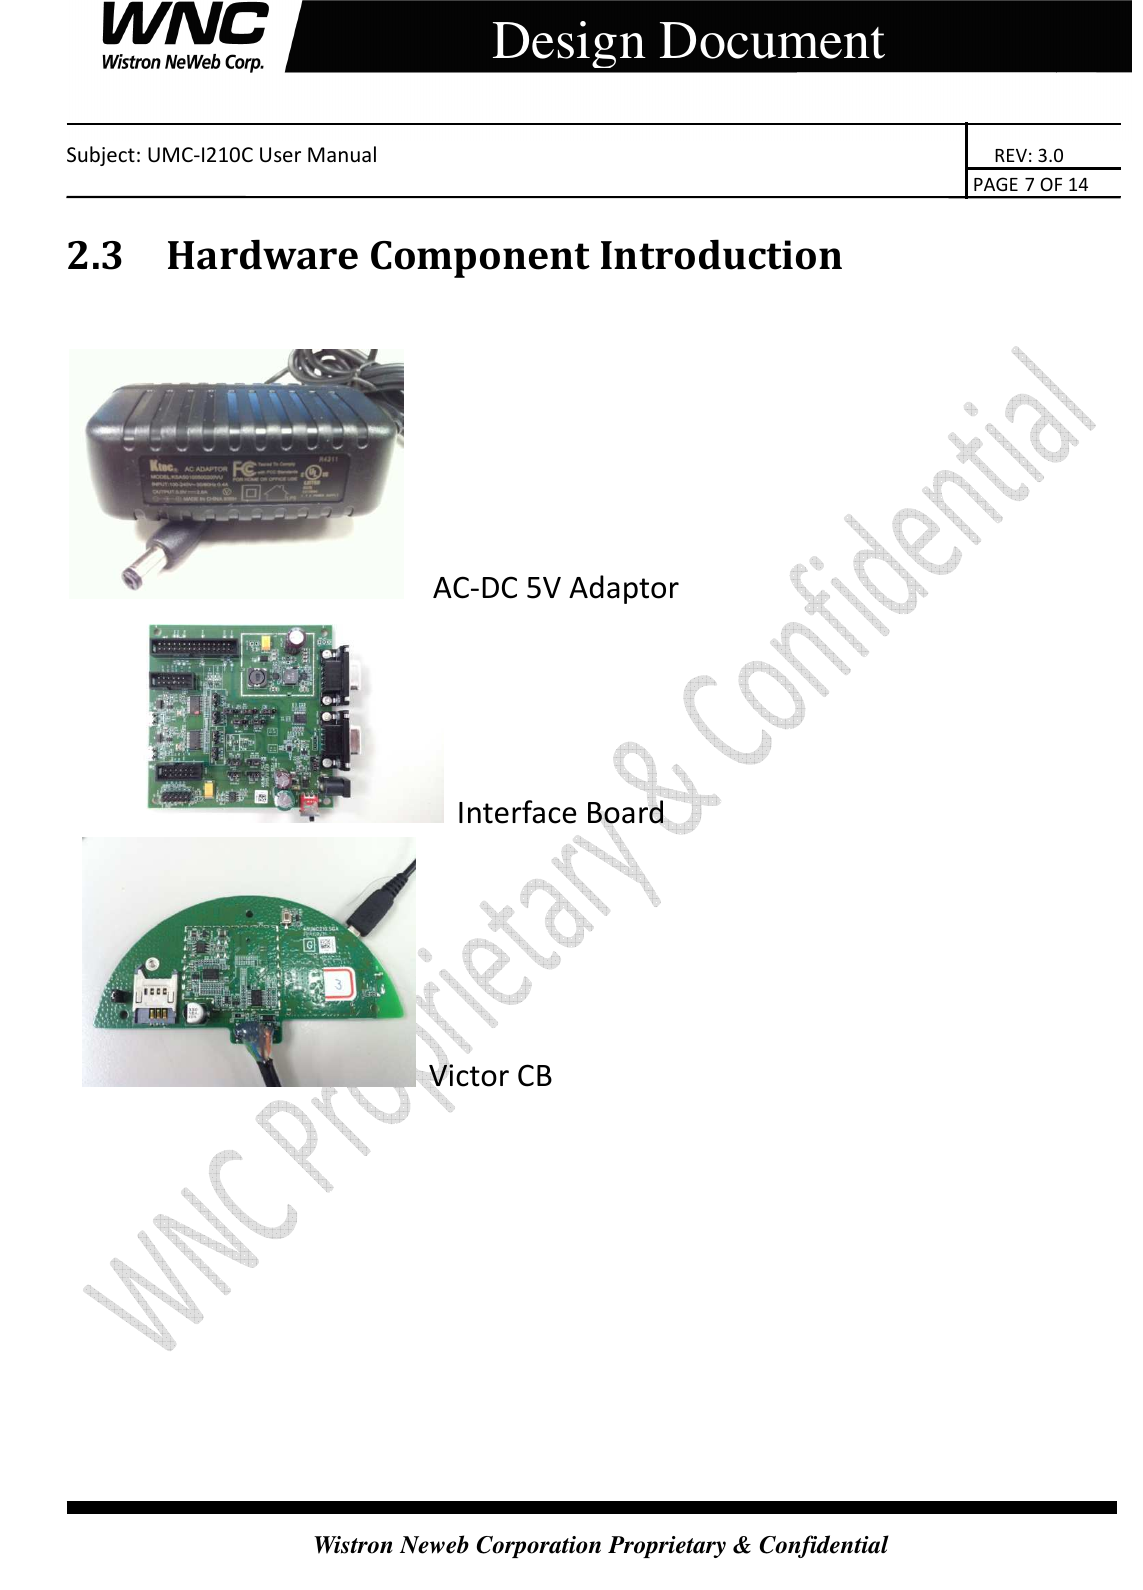    Subject: UMC-I210C User Manual                                                                       REV: 3.0                                                                                                                                                                               PAGE 7 OF 14  Wistron Neweb Corporation Proprietary &amp; Confidential     Design Document 2.3 Hardware Component Introduction    AC-DC 5V Adaptor  Interface Board     Victor CB        